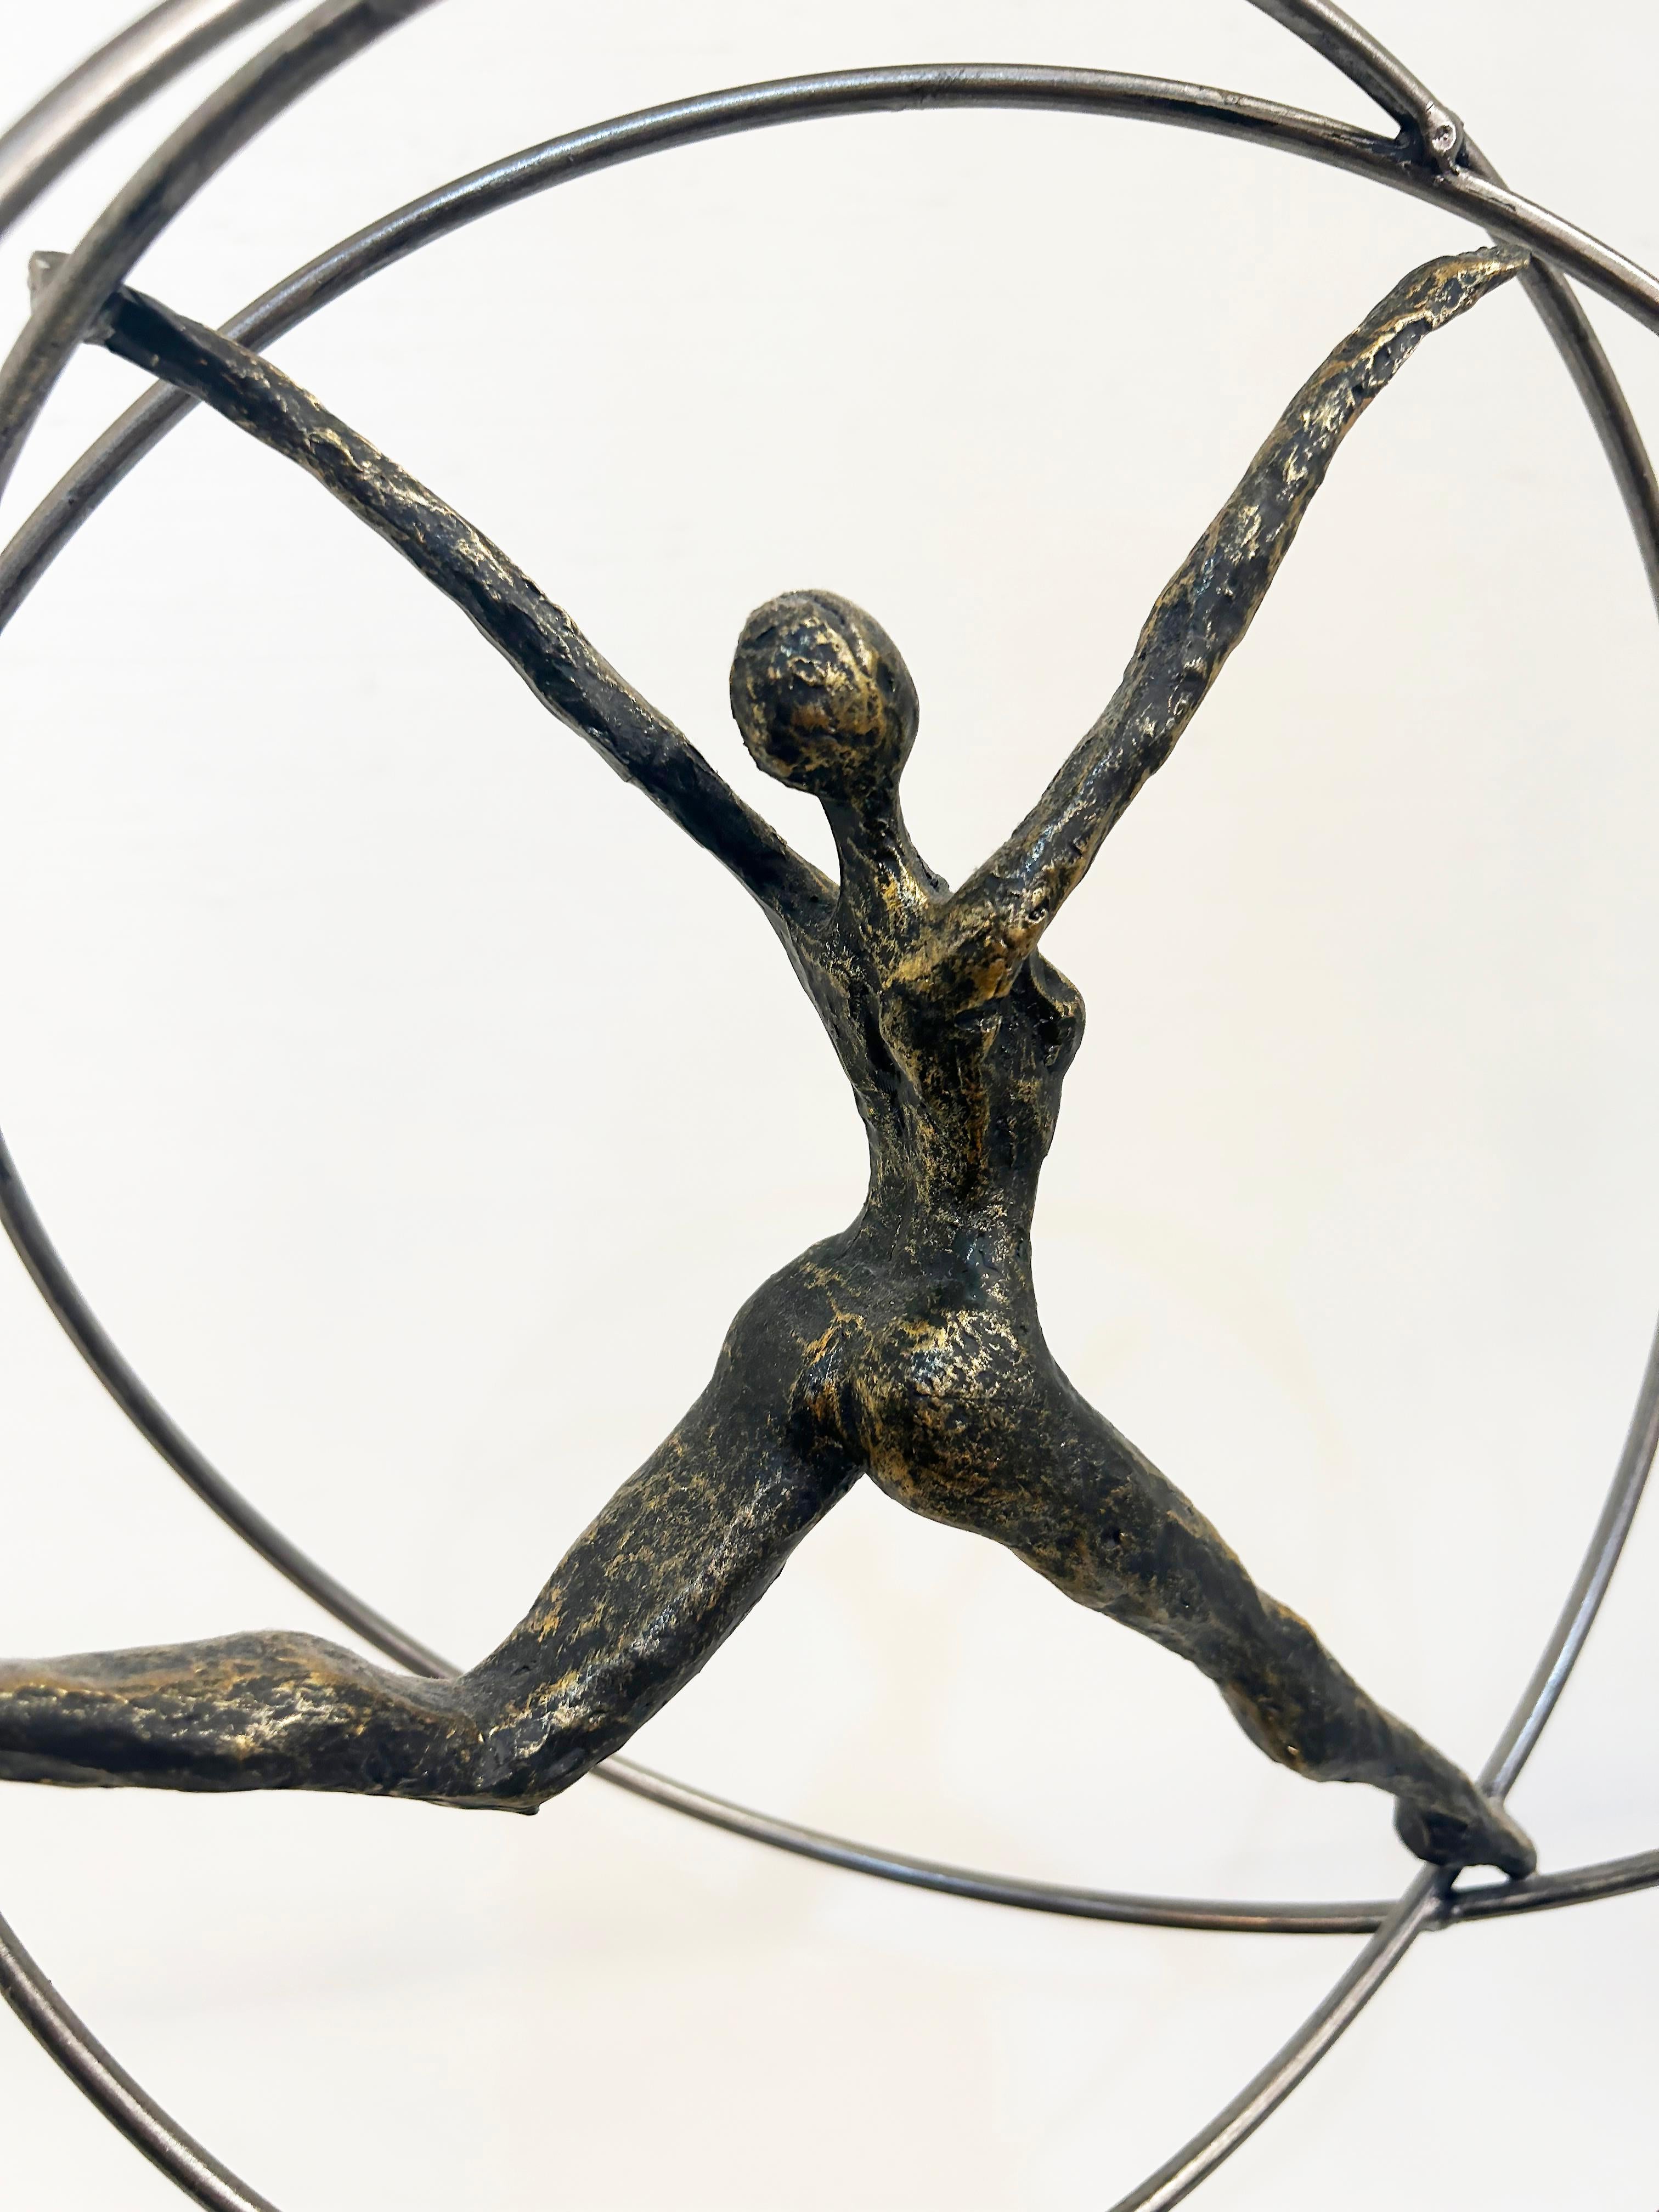 Modern Acrobats on Rings Figurative Metal Sculpture Mounted on Square Base In Good Condition For Sale In Miami, FL